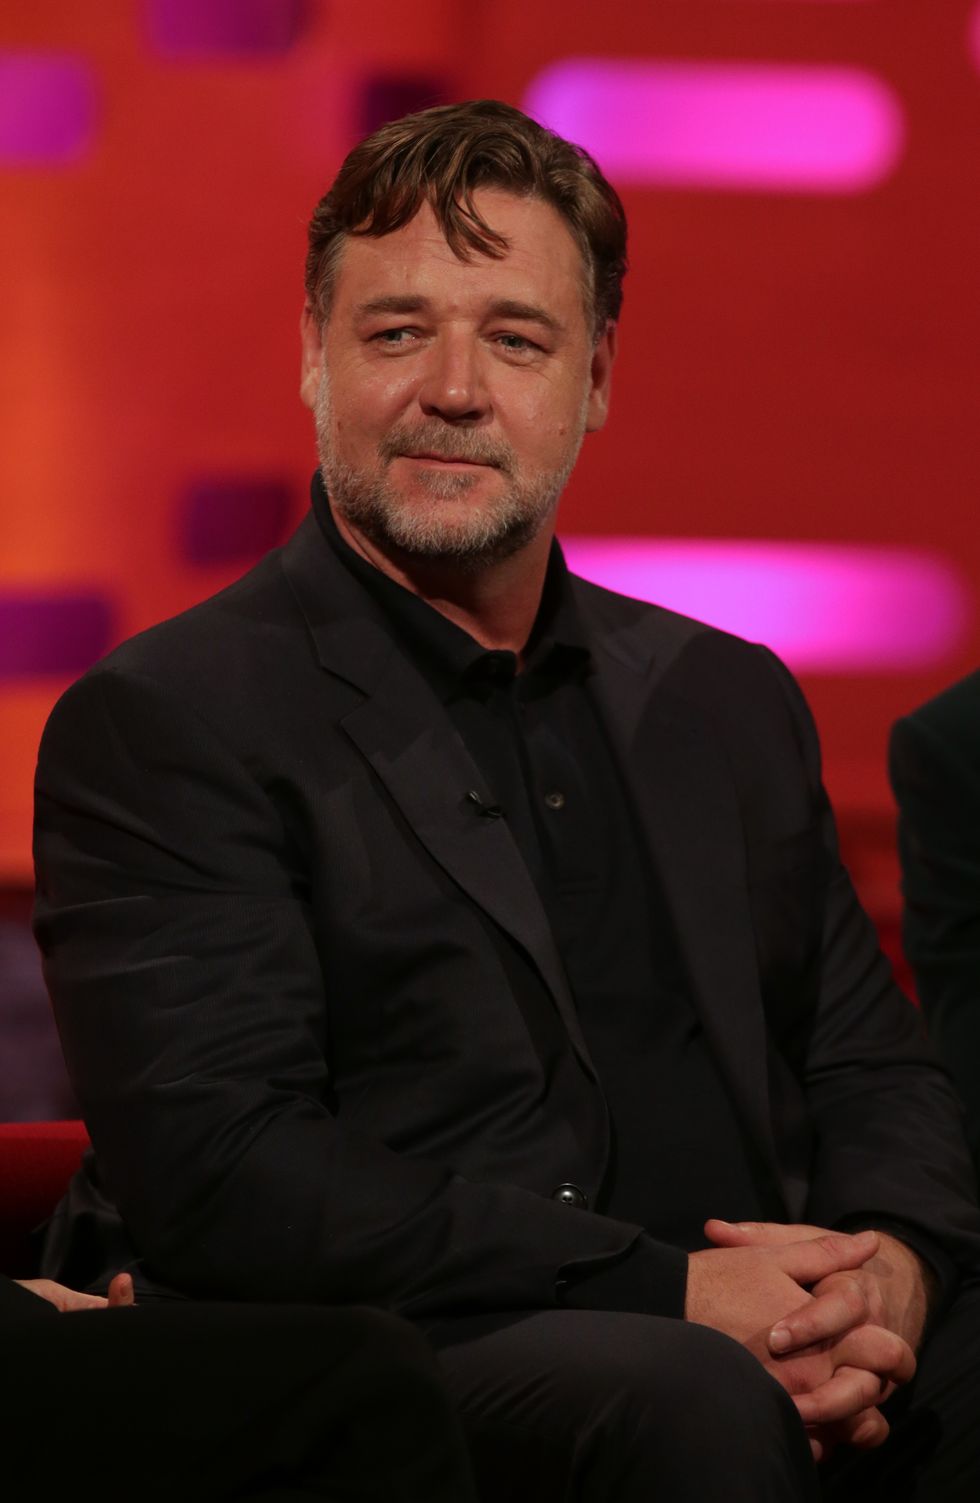 Russell Crowe and Lulu among stars designing charity tattoos for Glastonbury